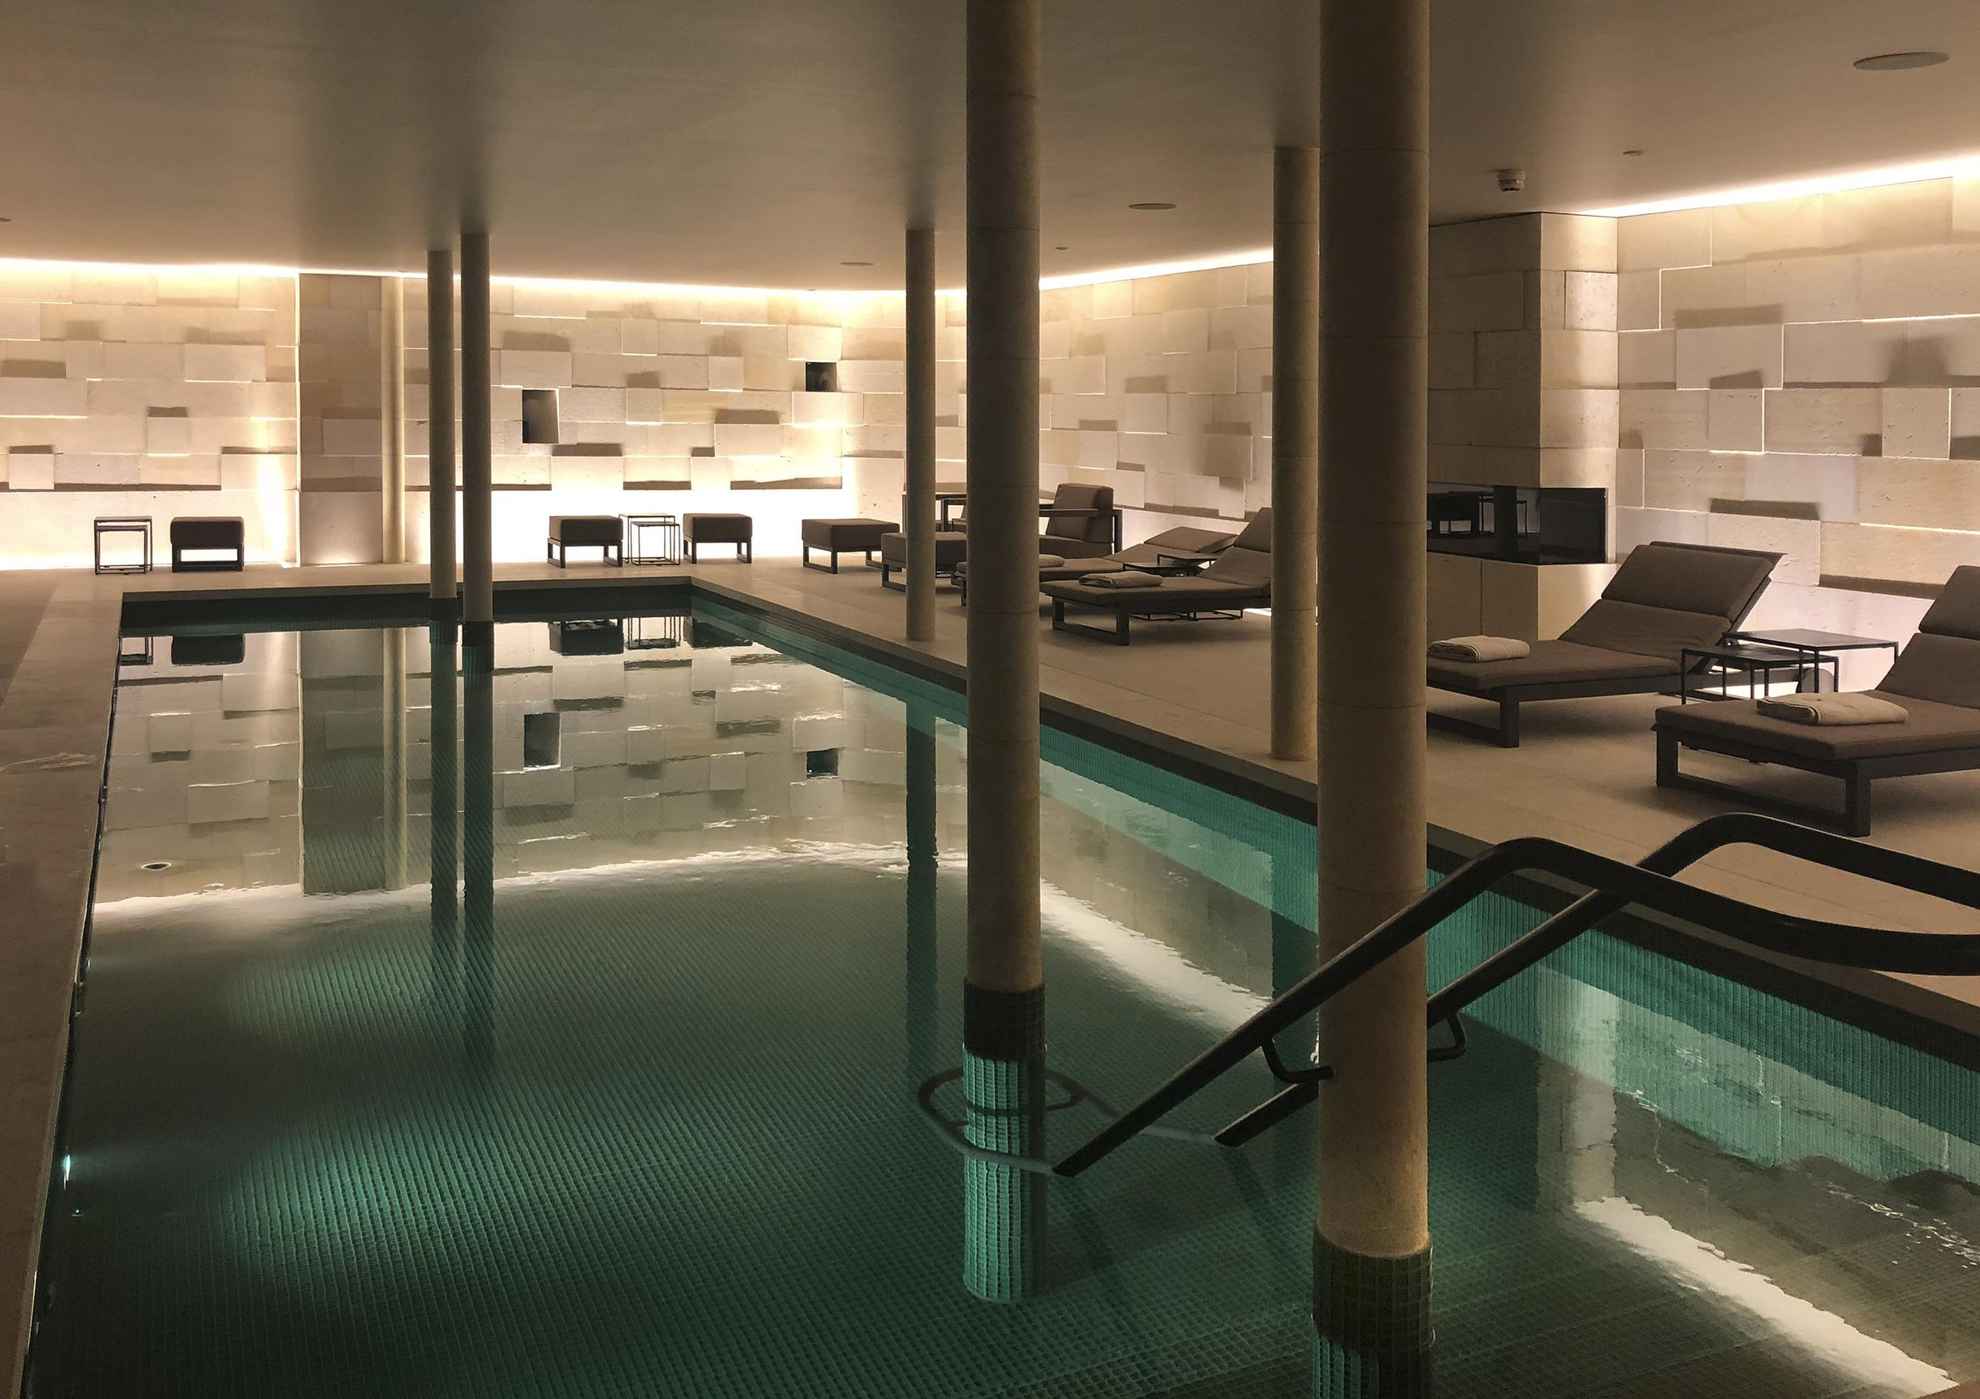 A dim lit room with lounge chairs and an indoor pool.